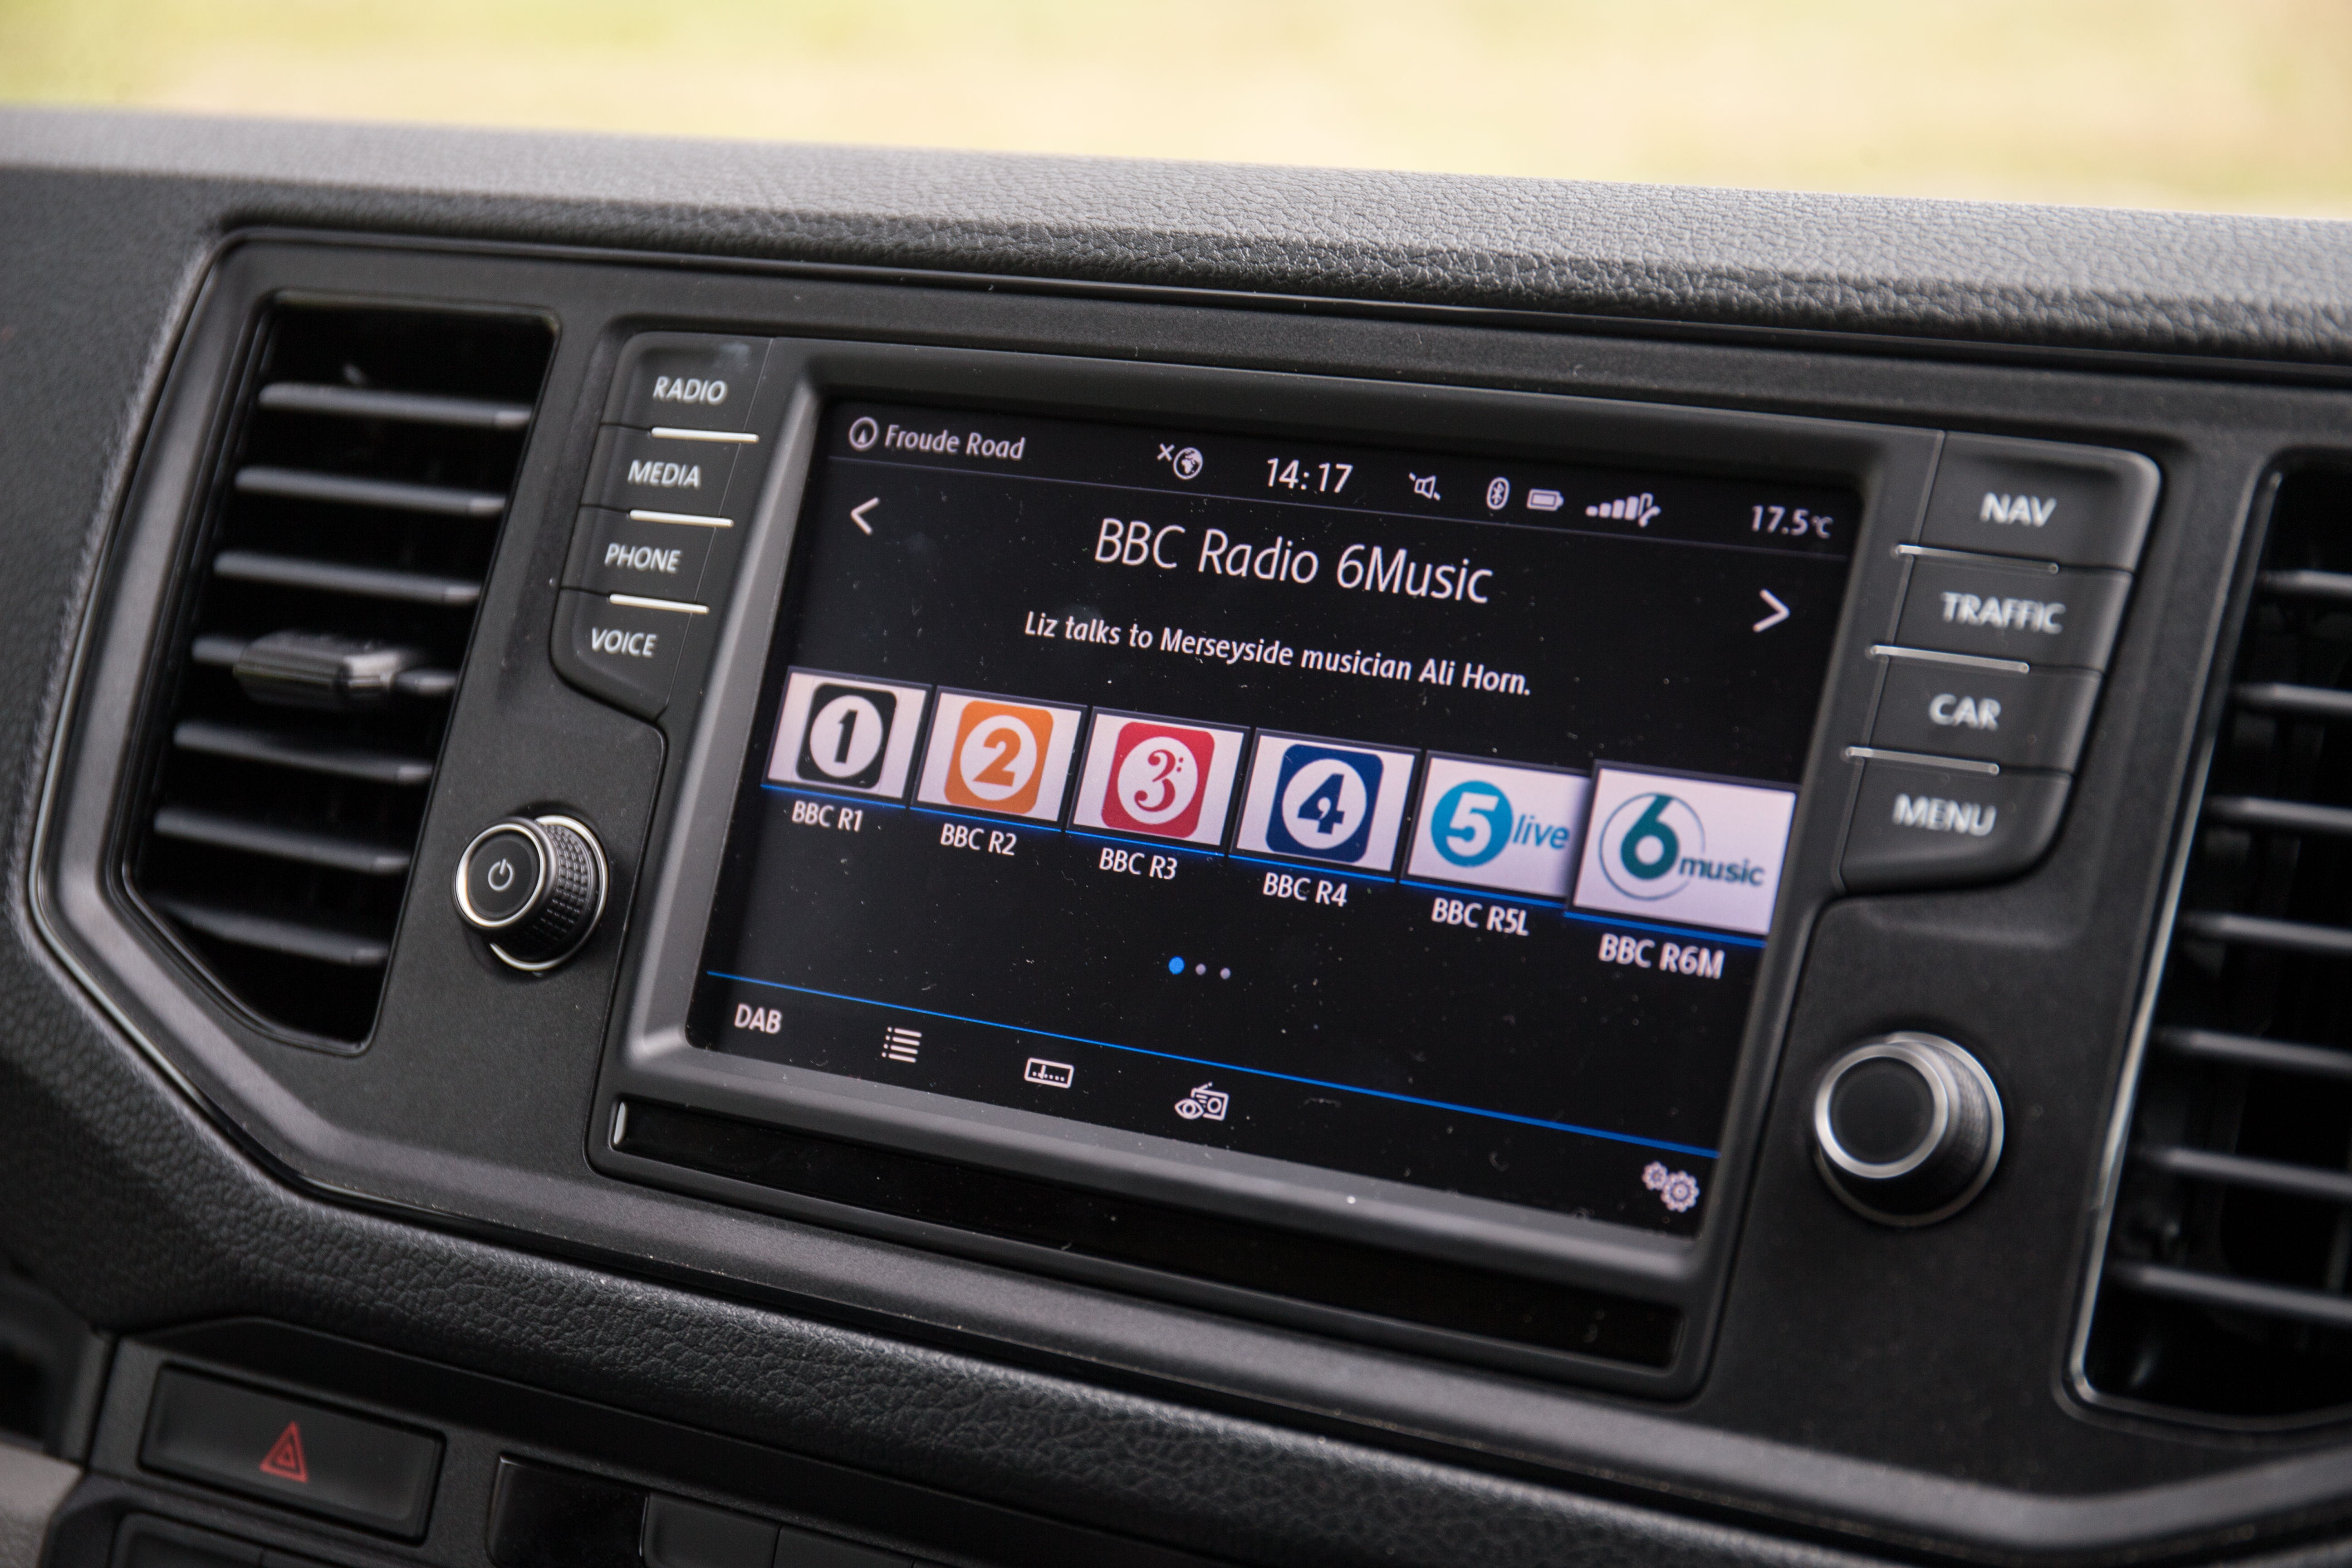 The main infotainment setup is clear and easy to use